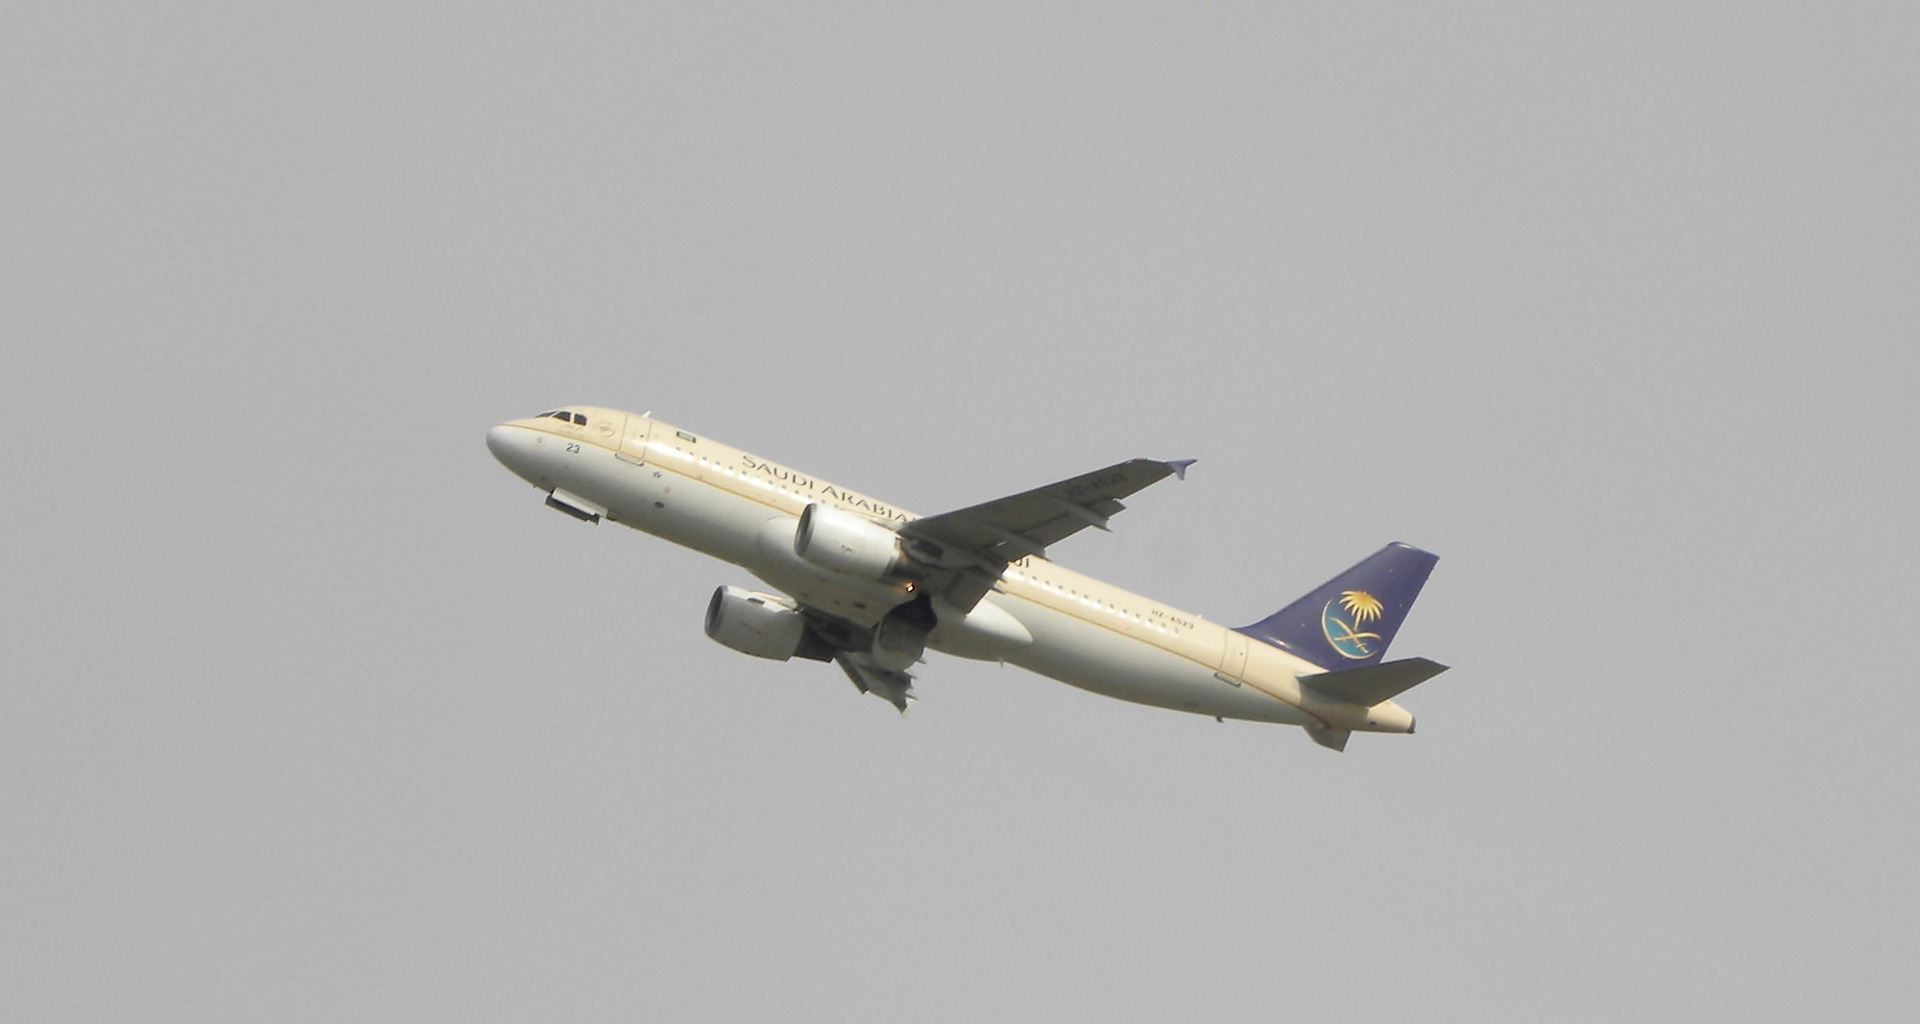 Saudia cites conditions for flights to 25 countries, including Indonesia